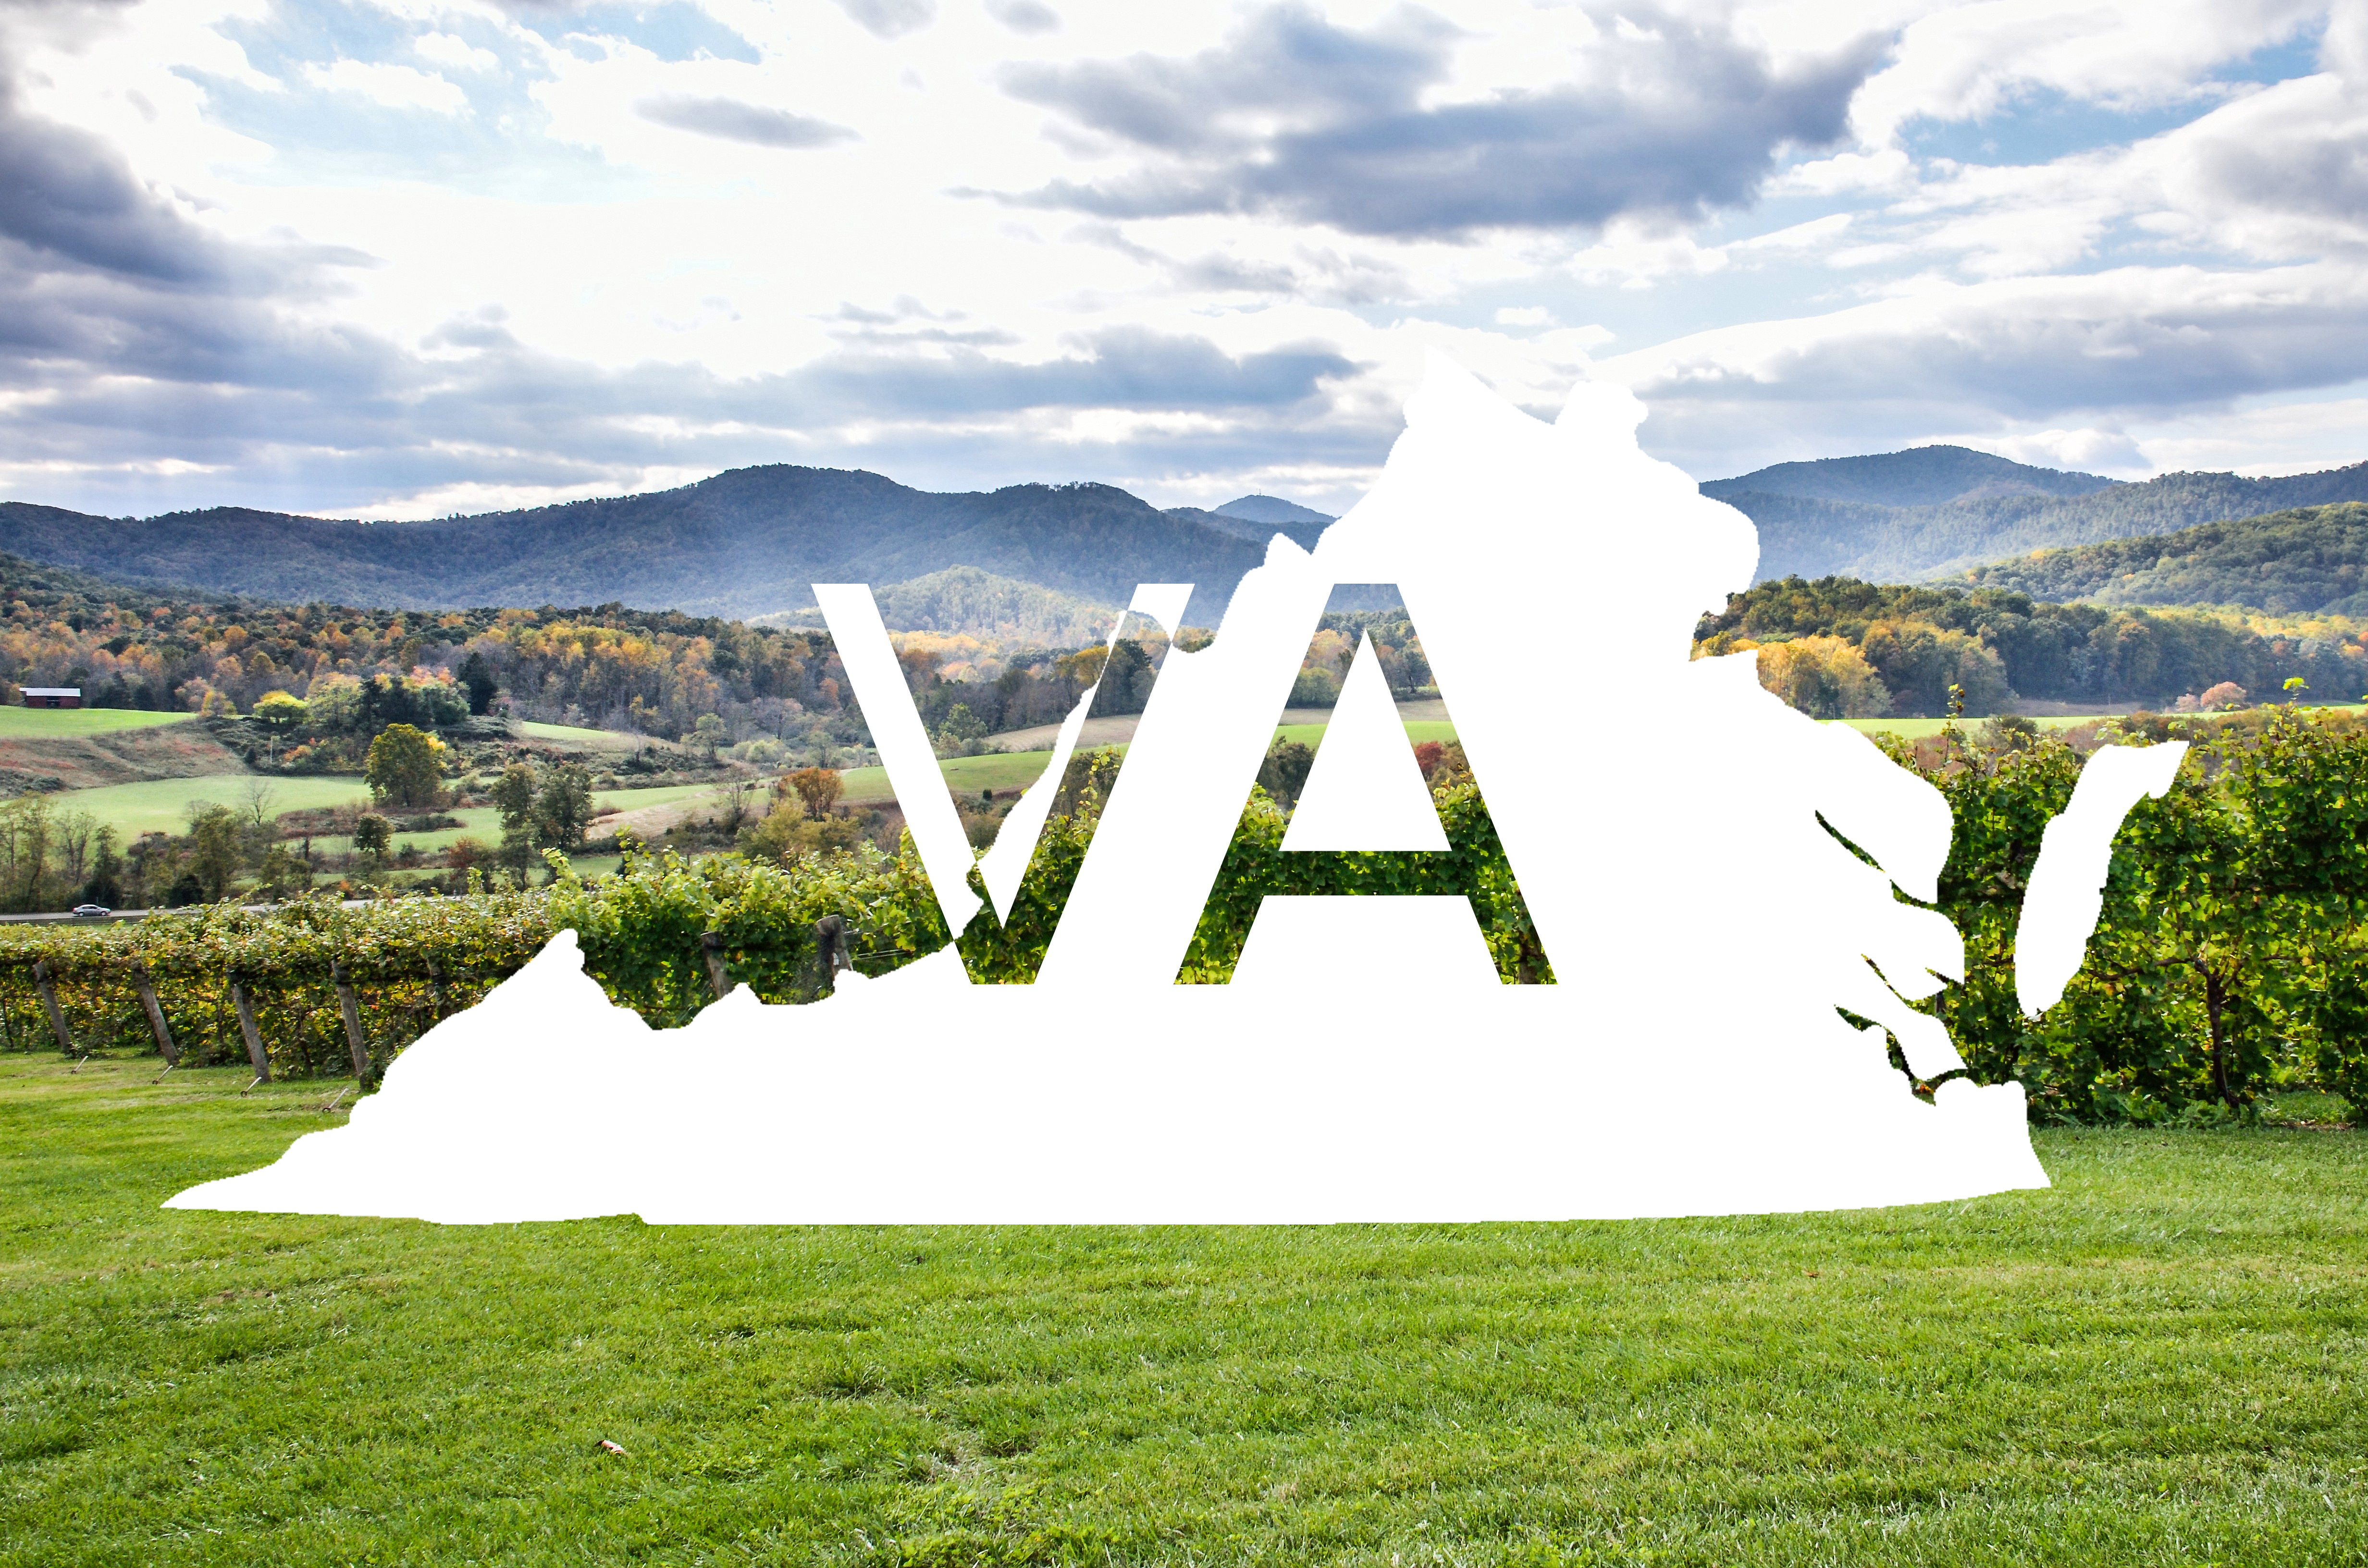 Silhouette of Virginia state with "VA" written overlaid over a wine region in Virginia